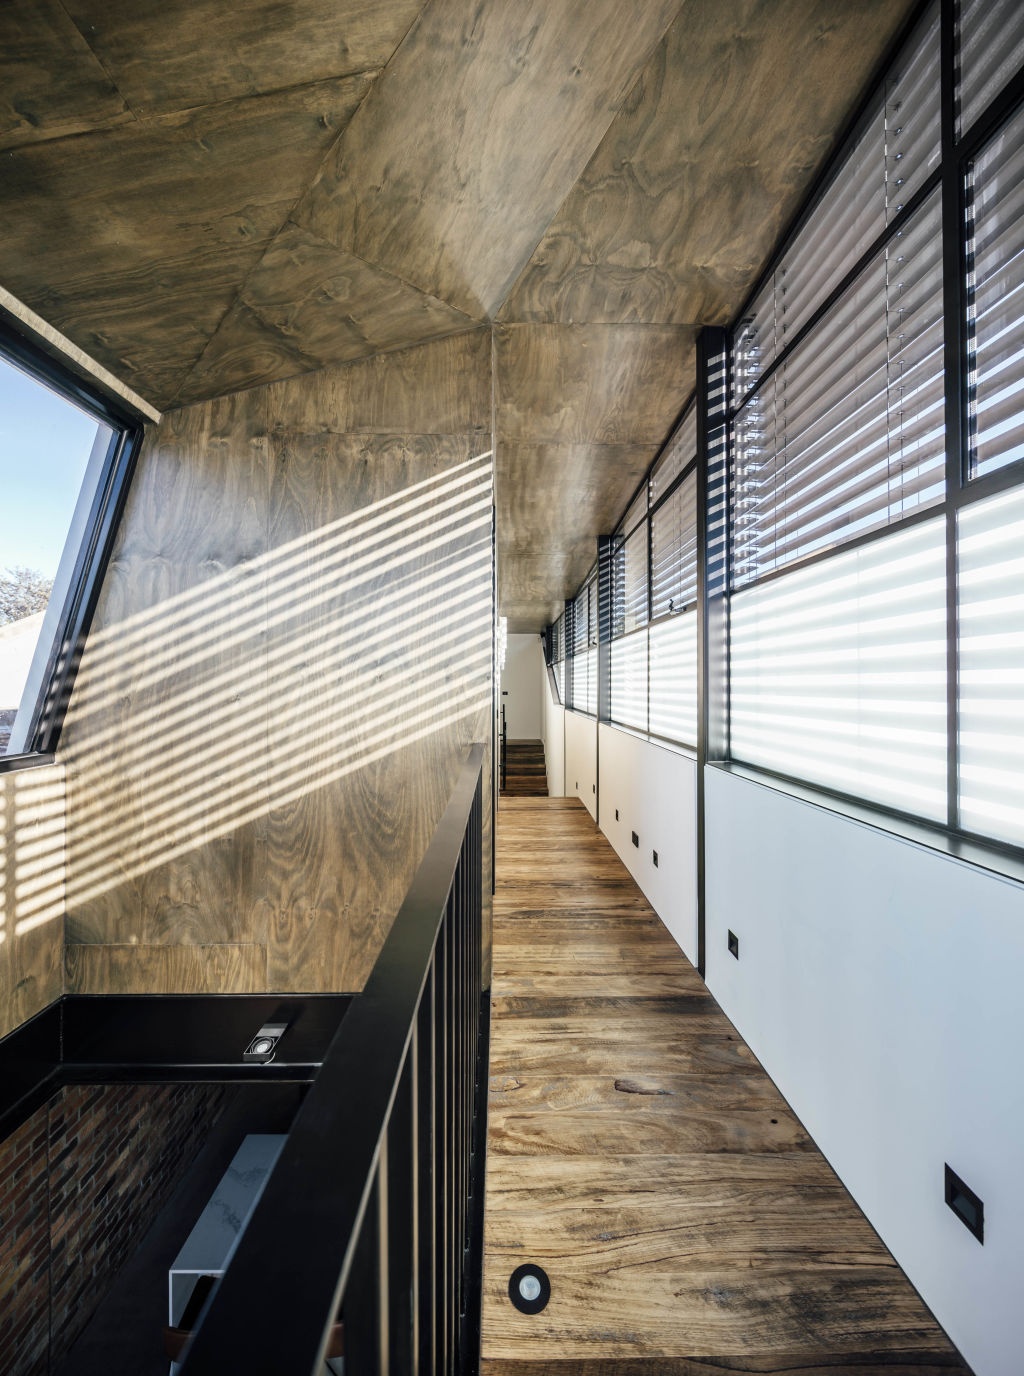 Recycled floors and fascinating shadow-play animate the upper hallway. Photo: Michael Kai